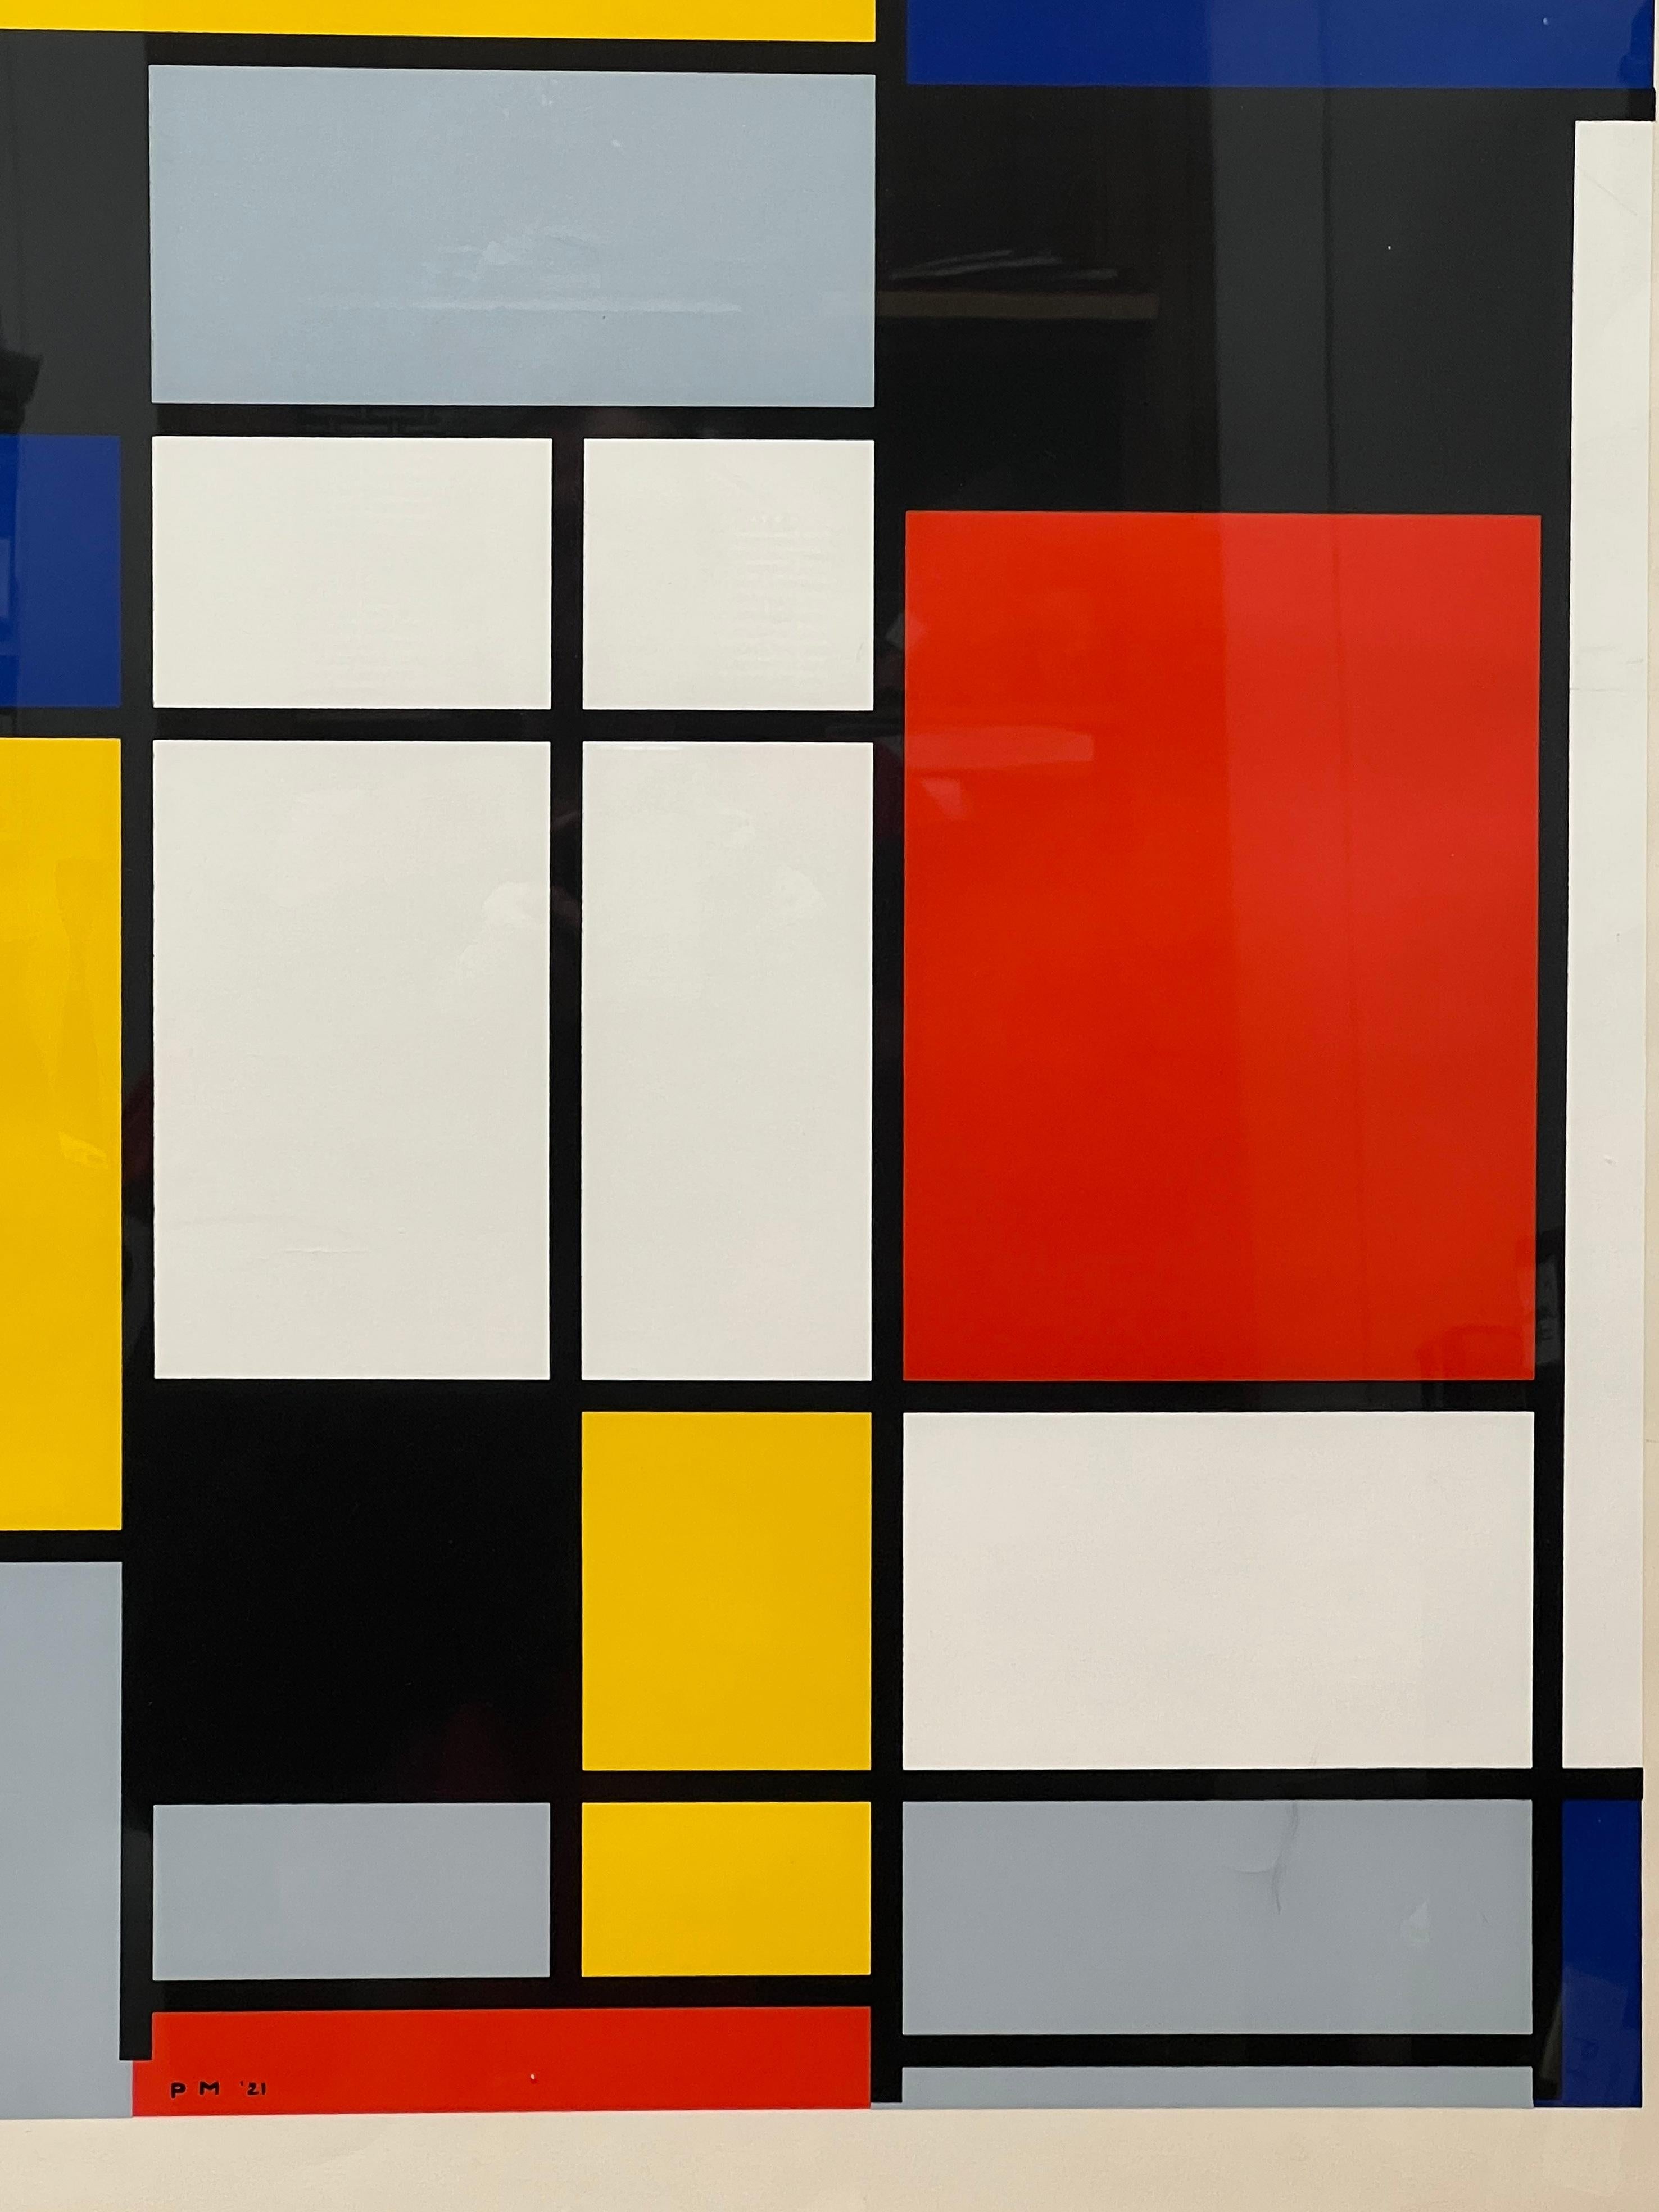 Submitting artworks in our gallery is not only a way to showcase art, but also an opportunity to share with you stories about the paintings and the artists behind them.

Piet Mondrian, a purist of colors and lines, was an immense visionary of